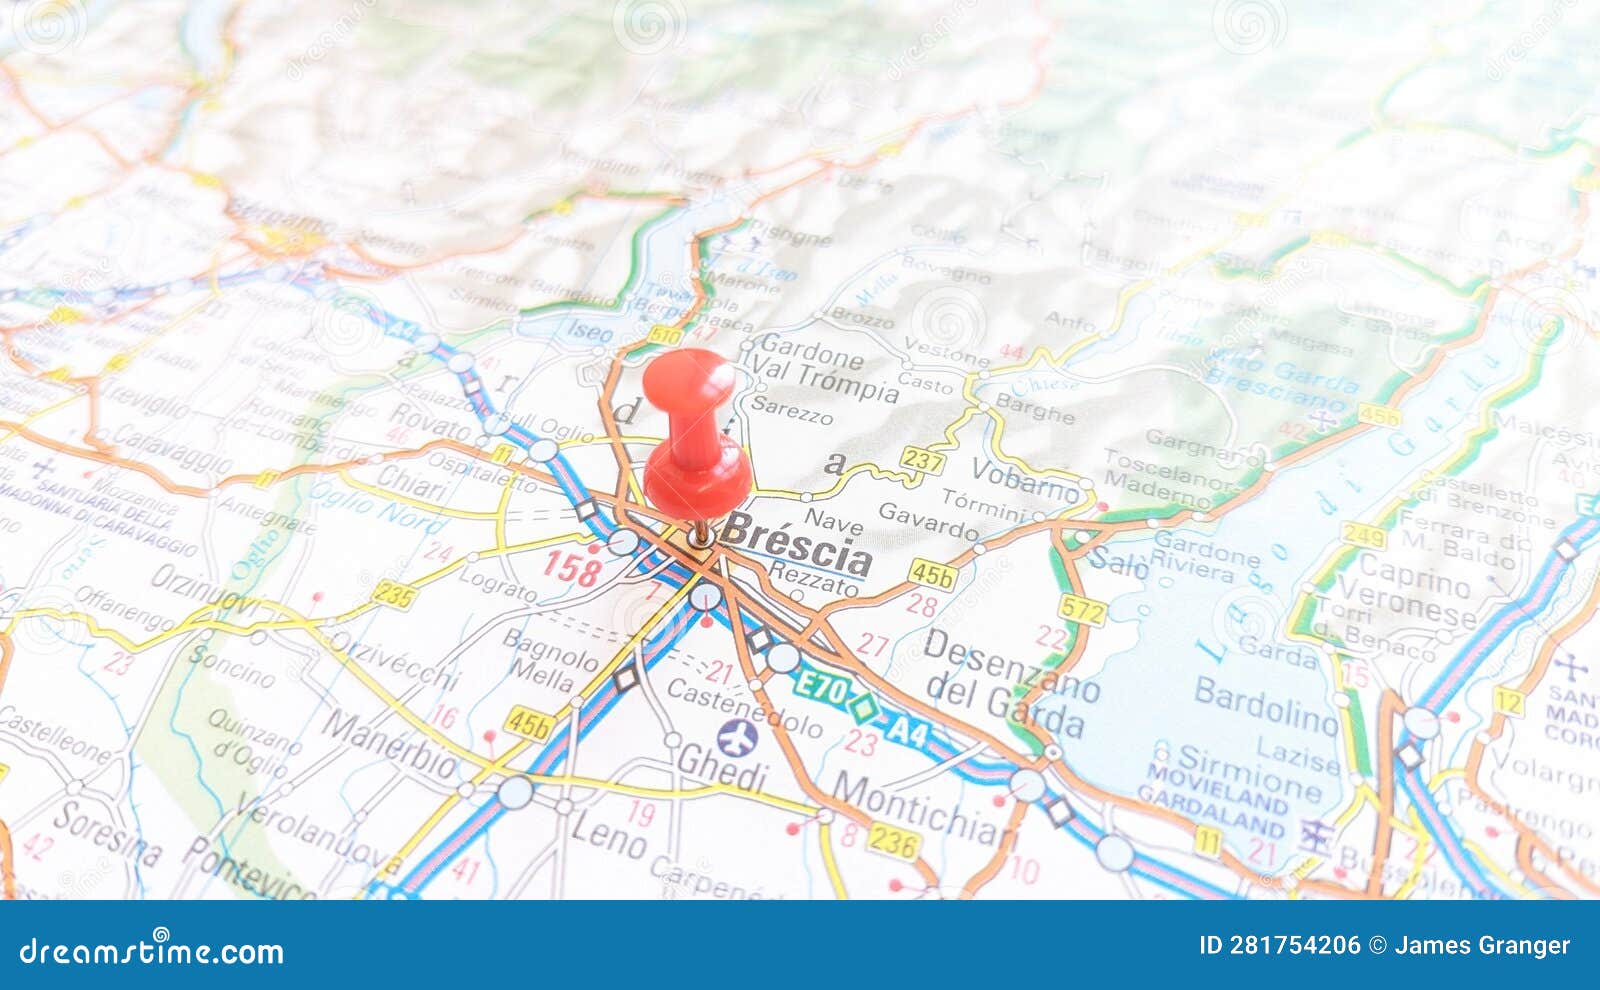 a red board pin stuck in brescia on a map of italy